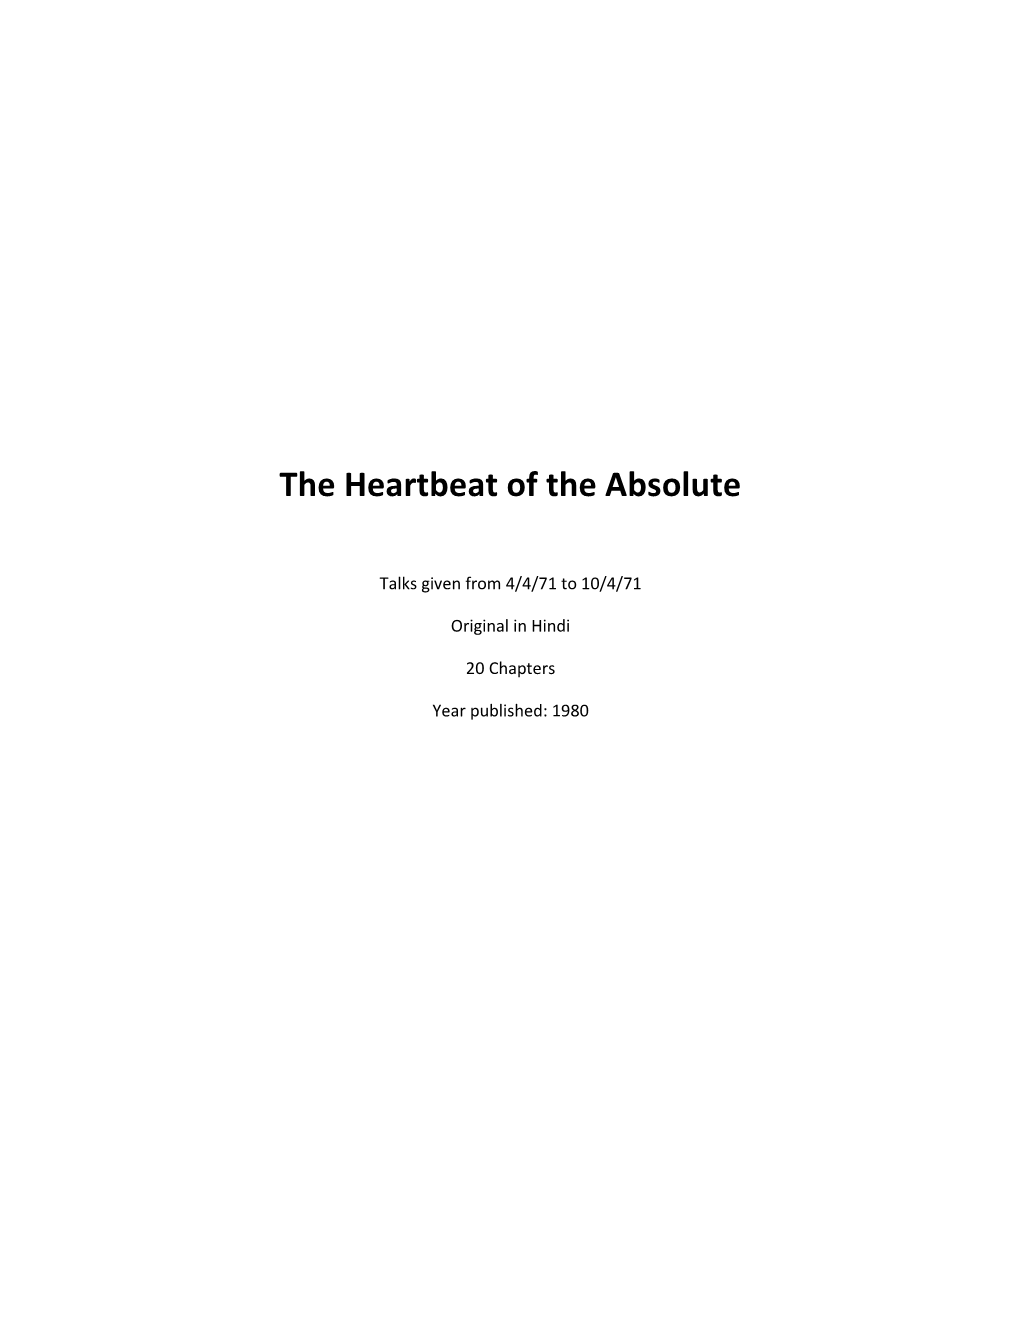 The Heartbeat of the Absolute